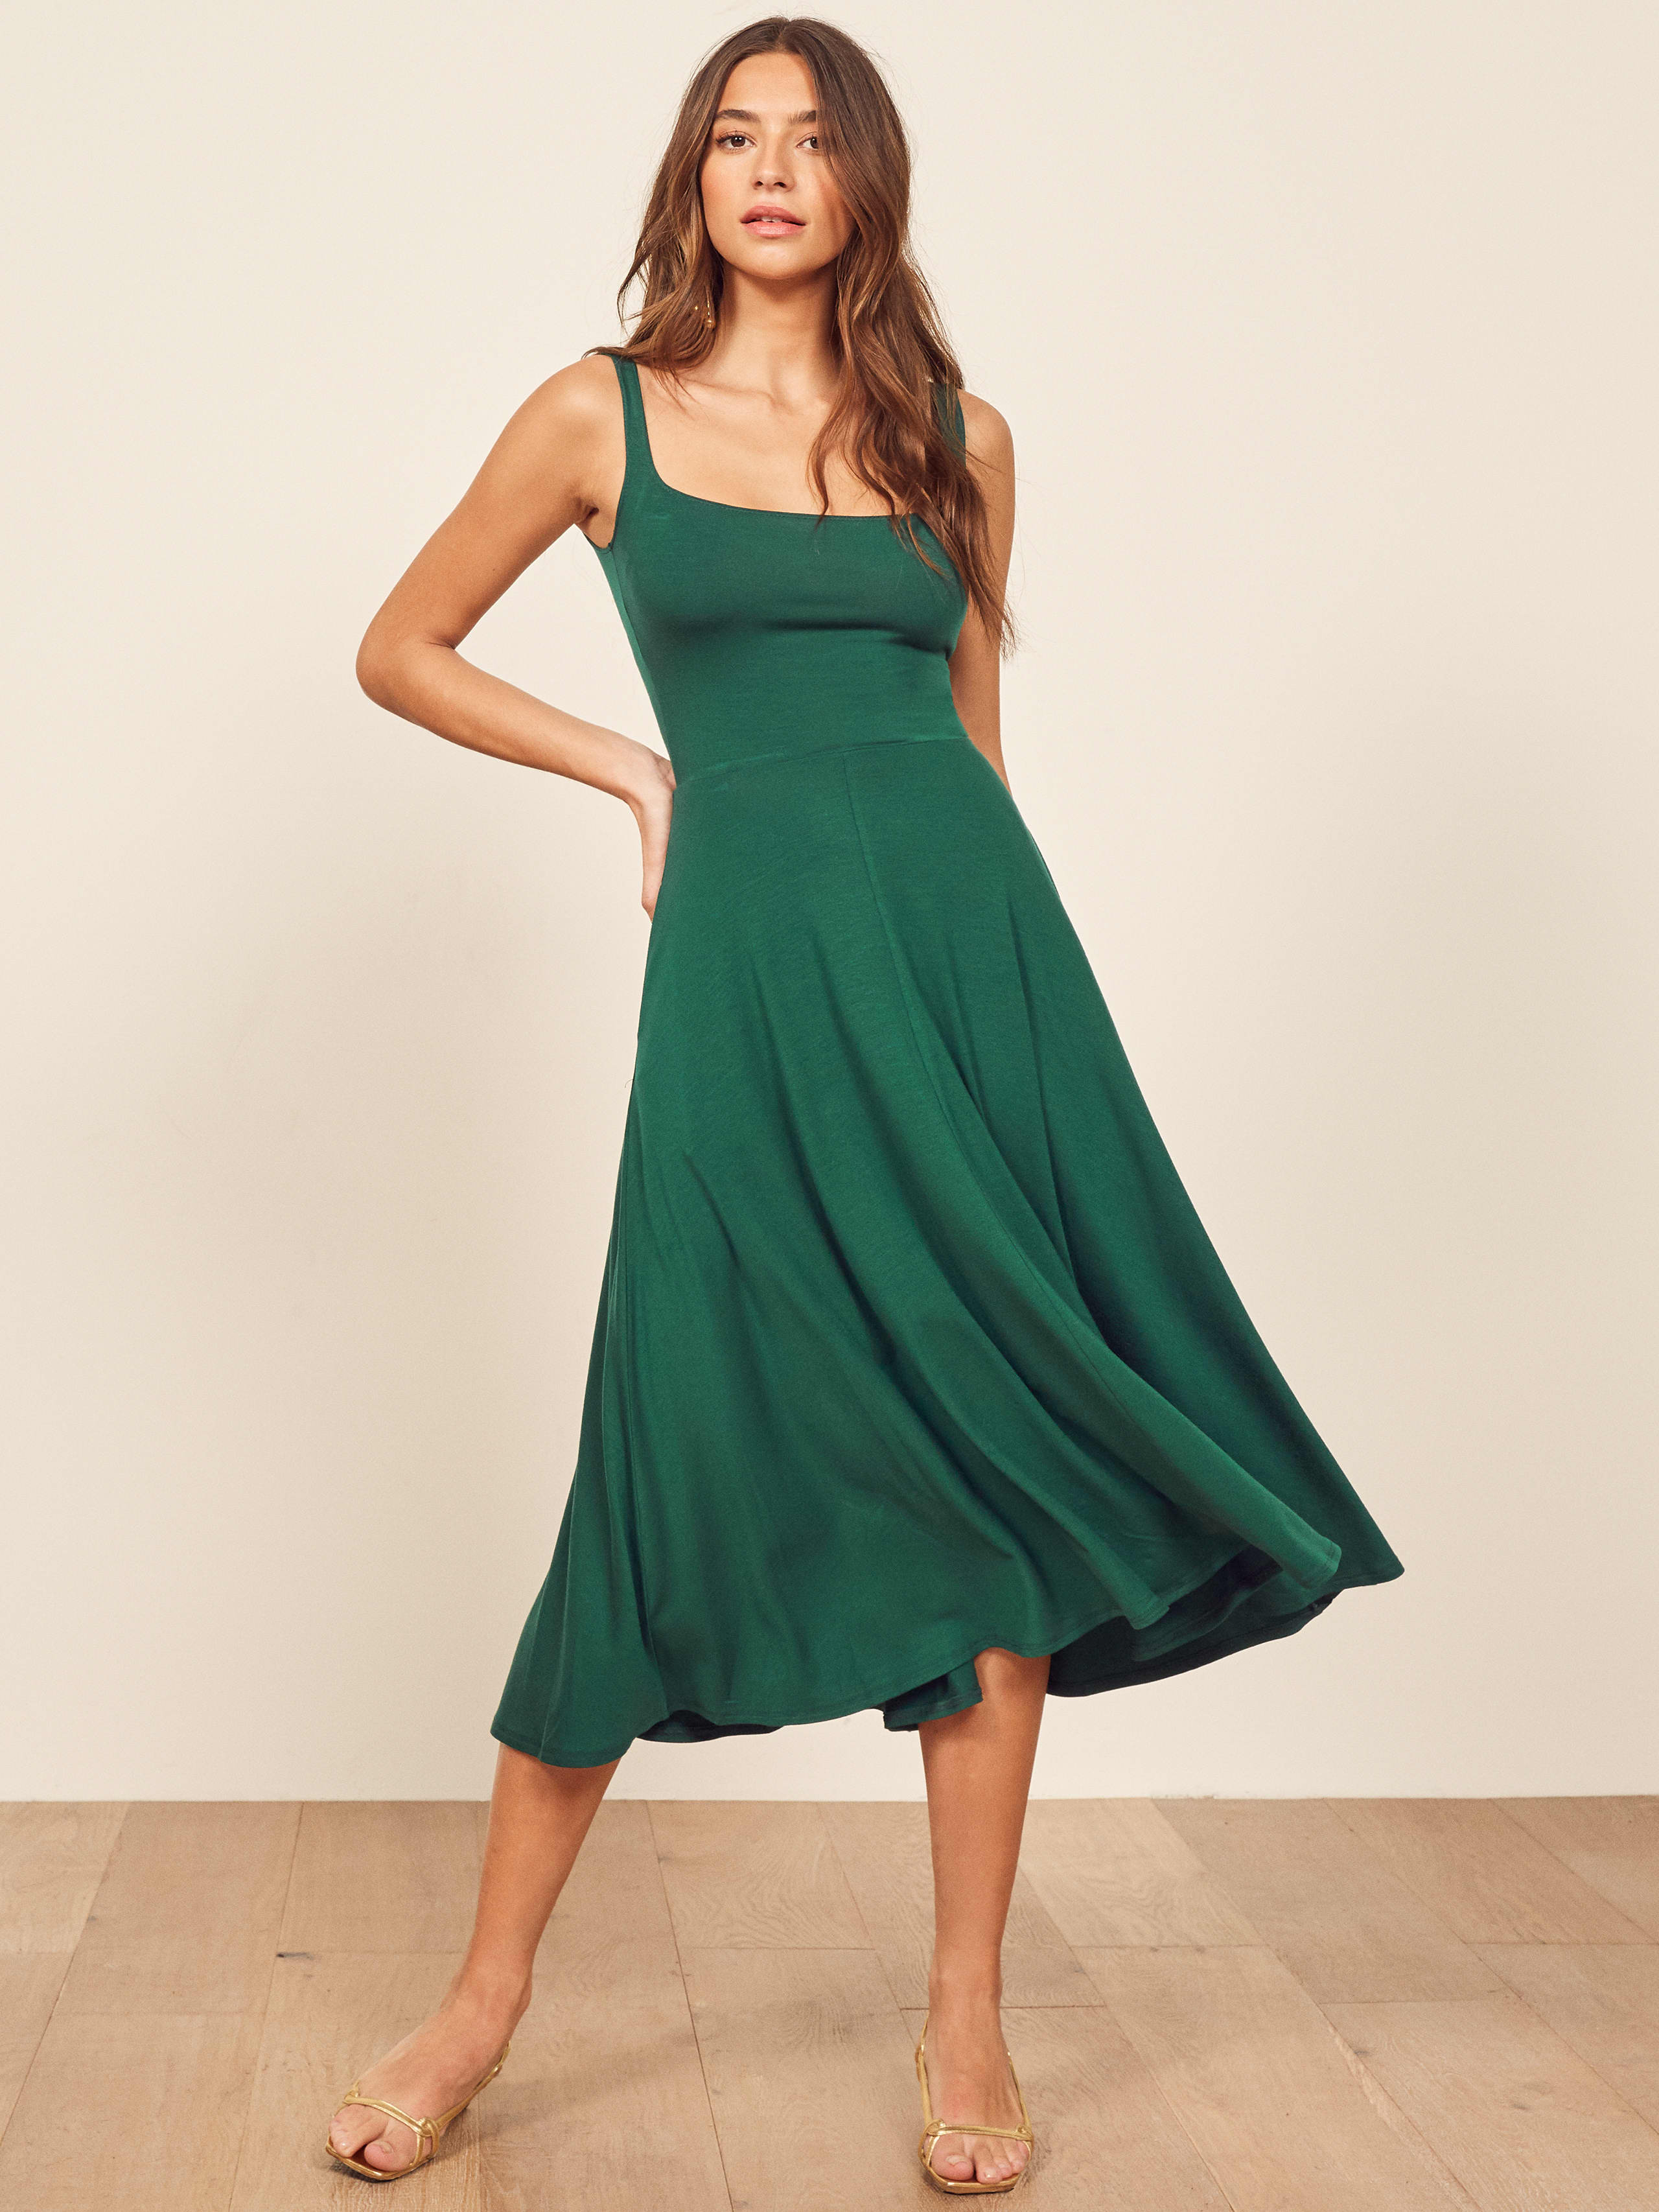 Mary Dress - Reformation